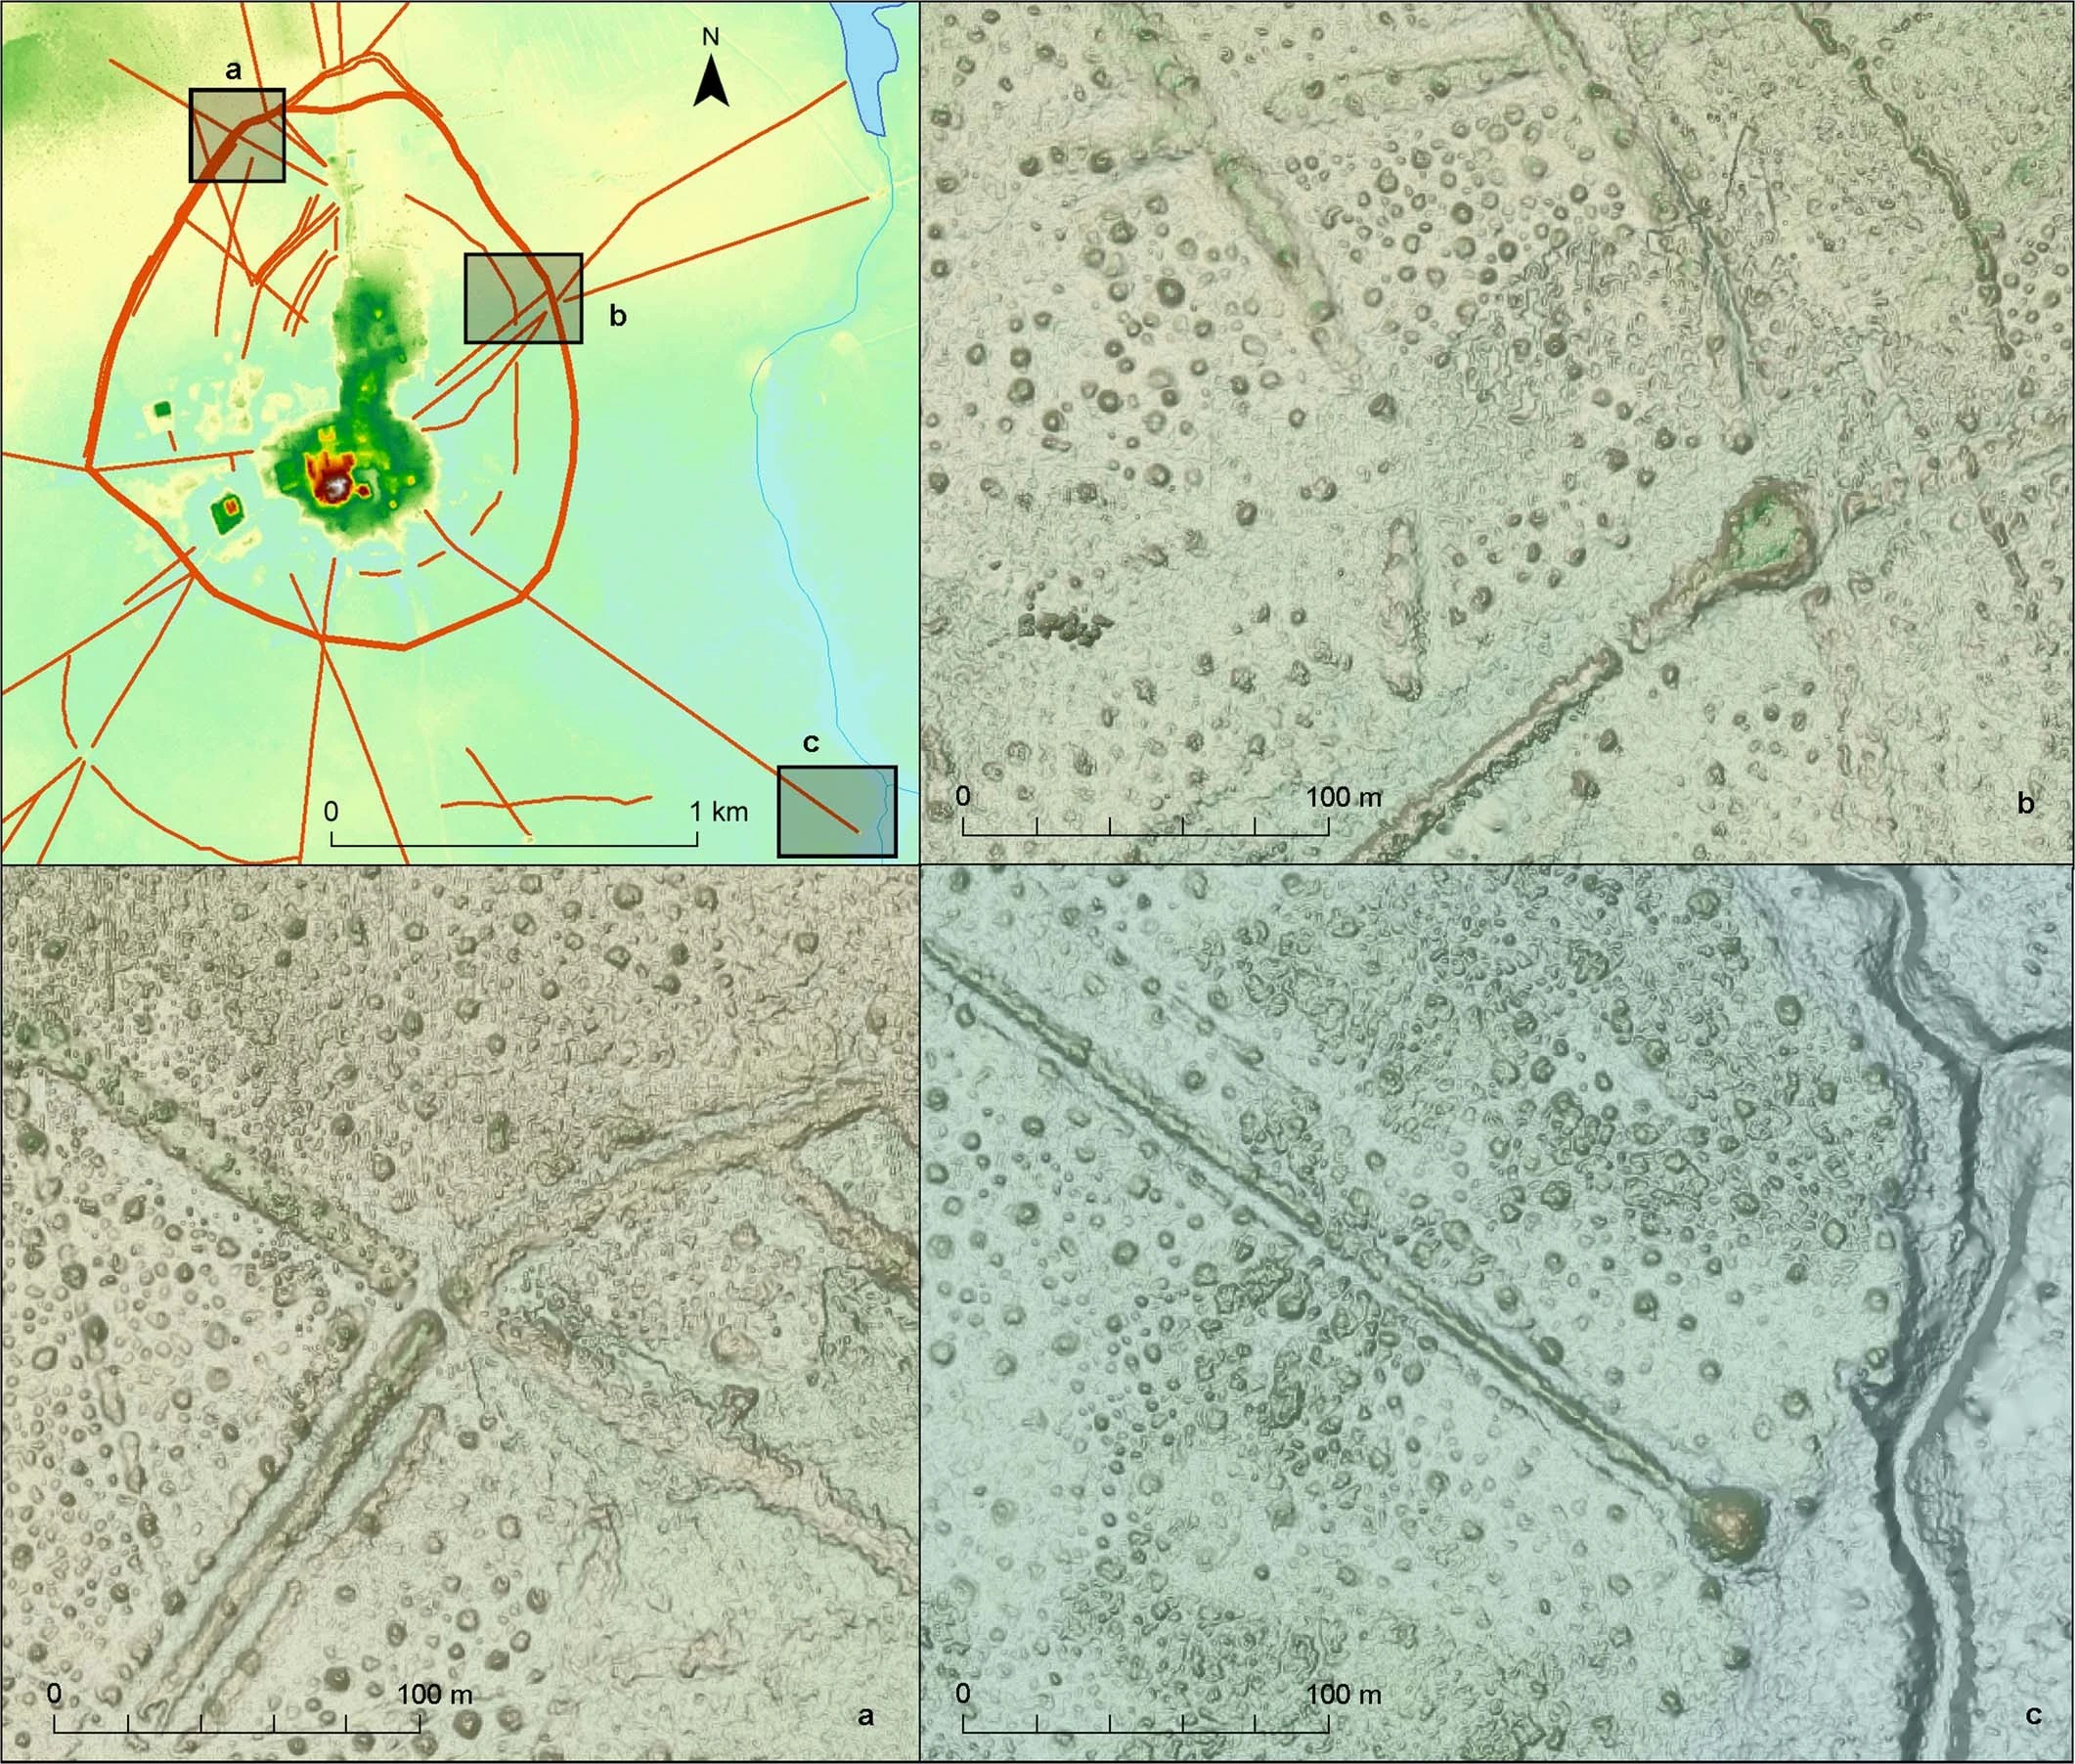 Lidar images of features found in the city of Cassarabe using